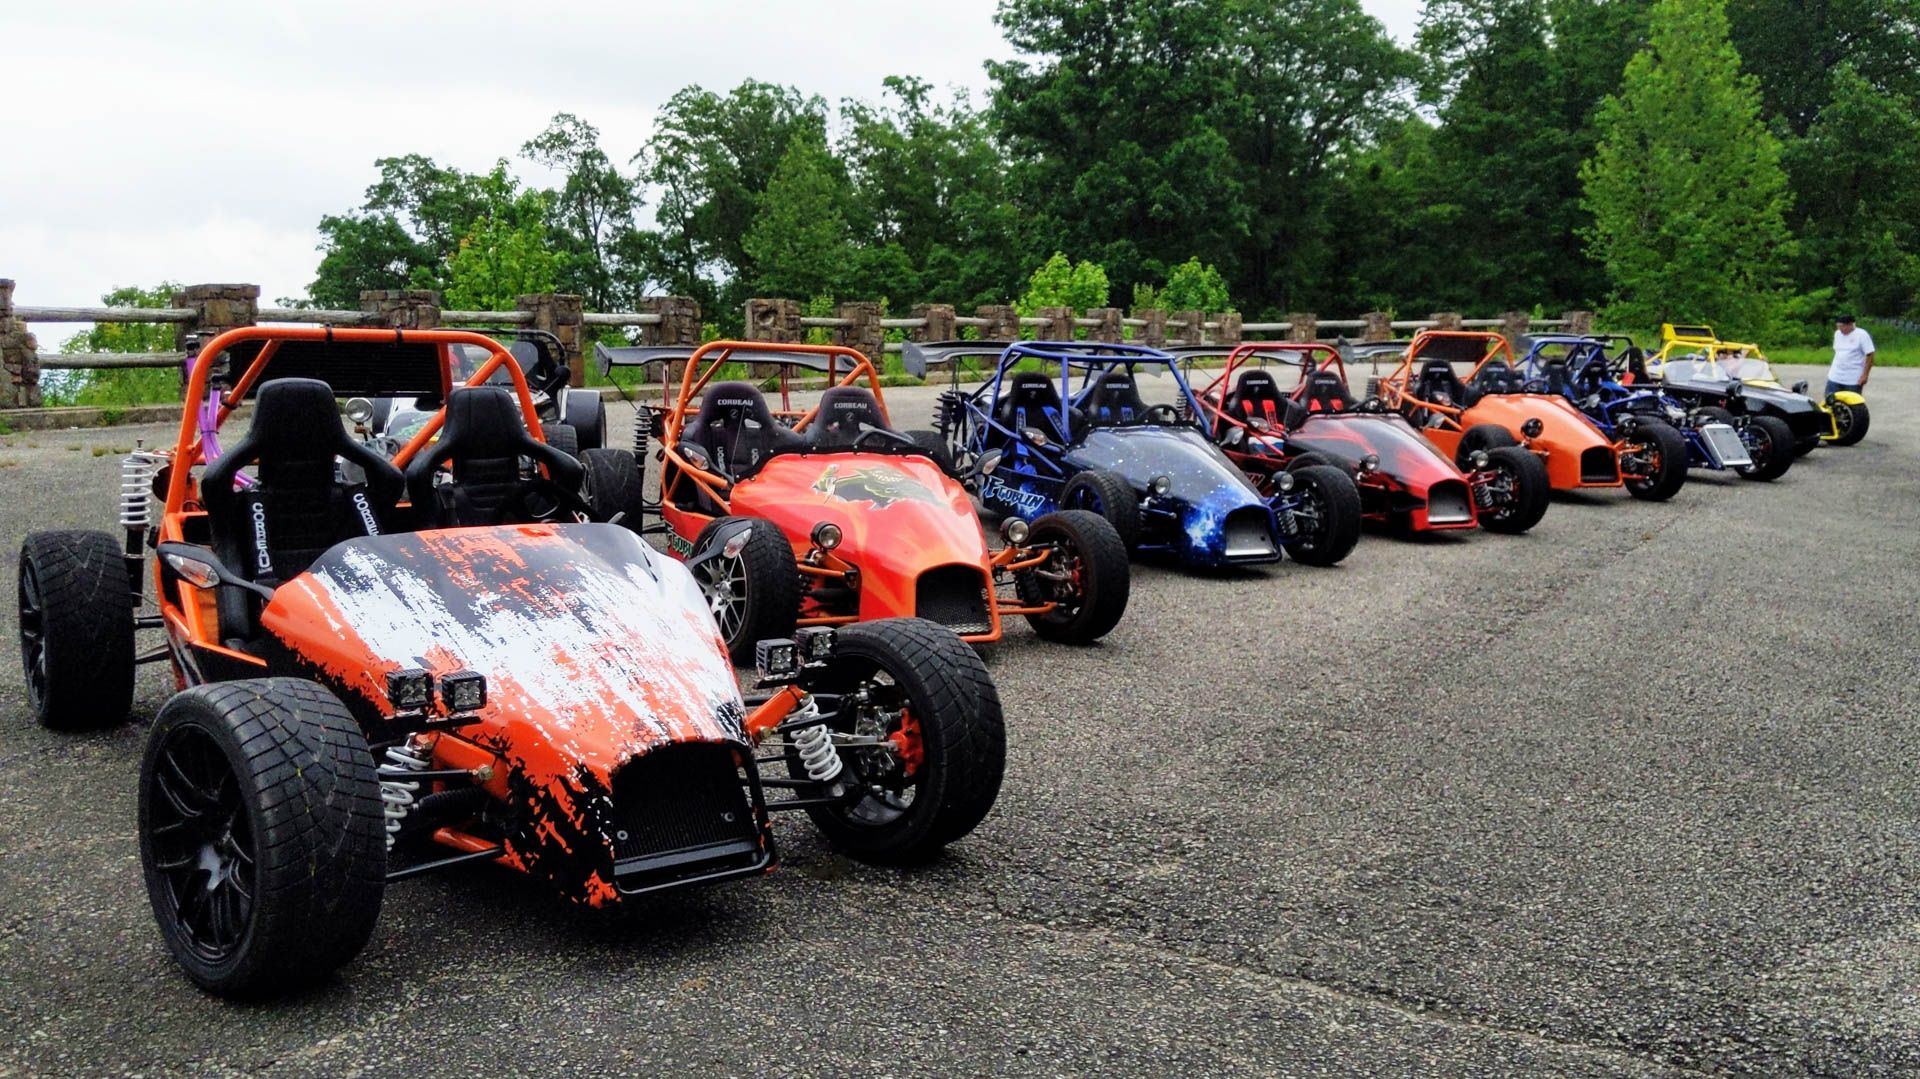 df goblin kit car line-up in various configuration